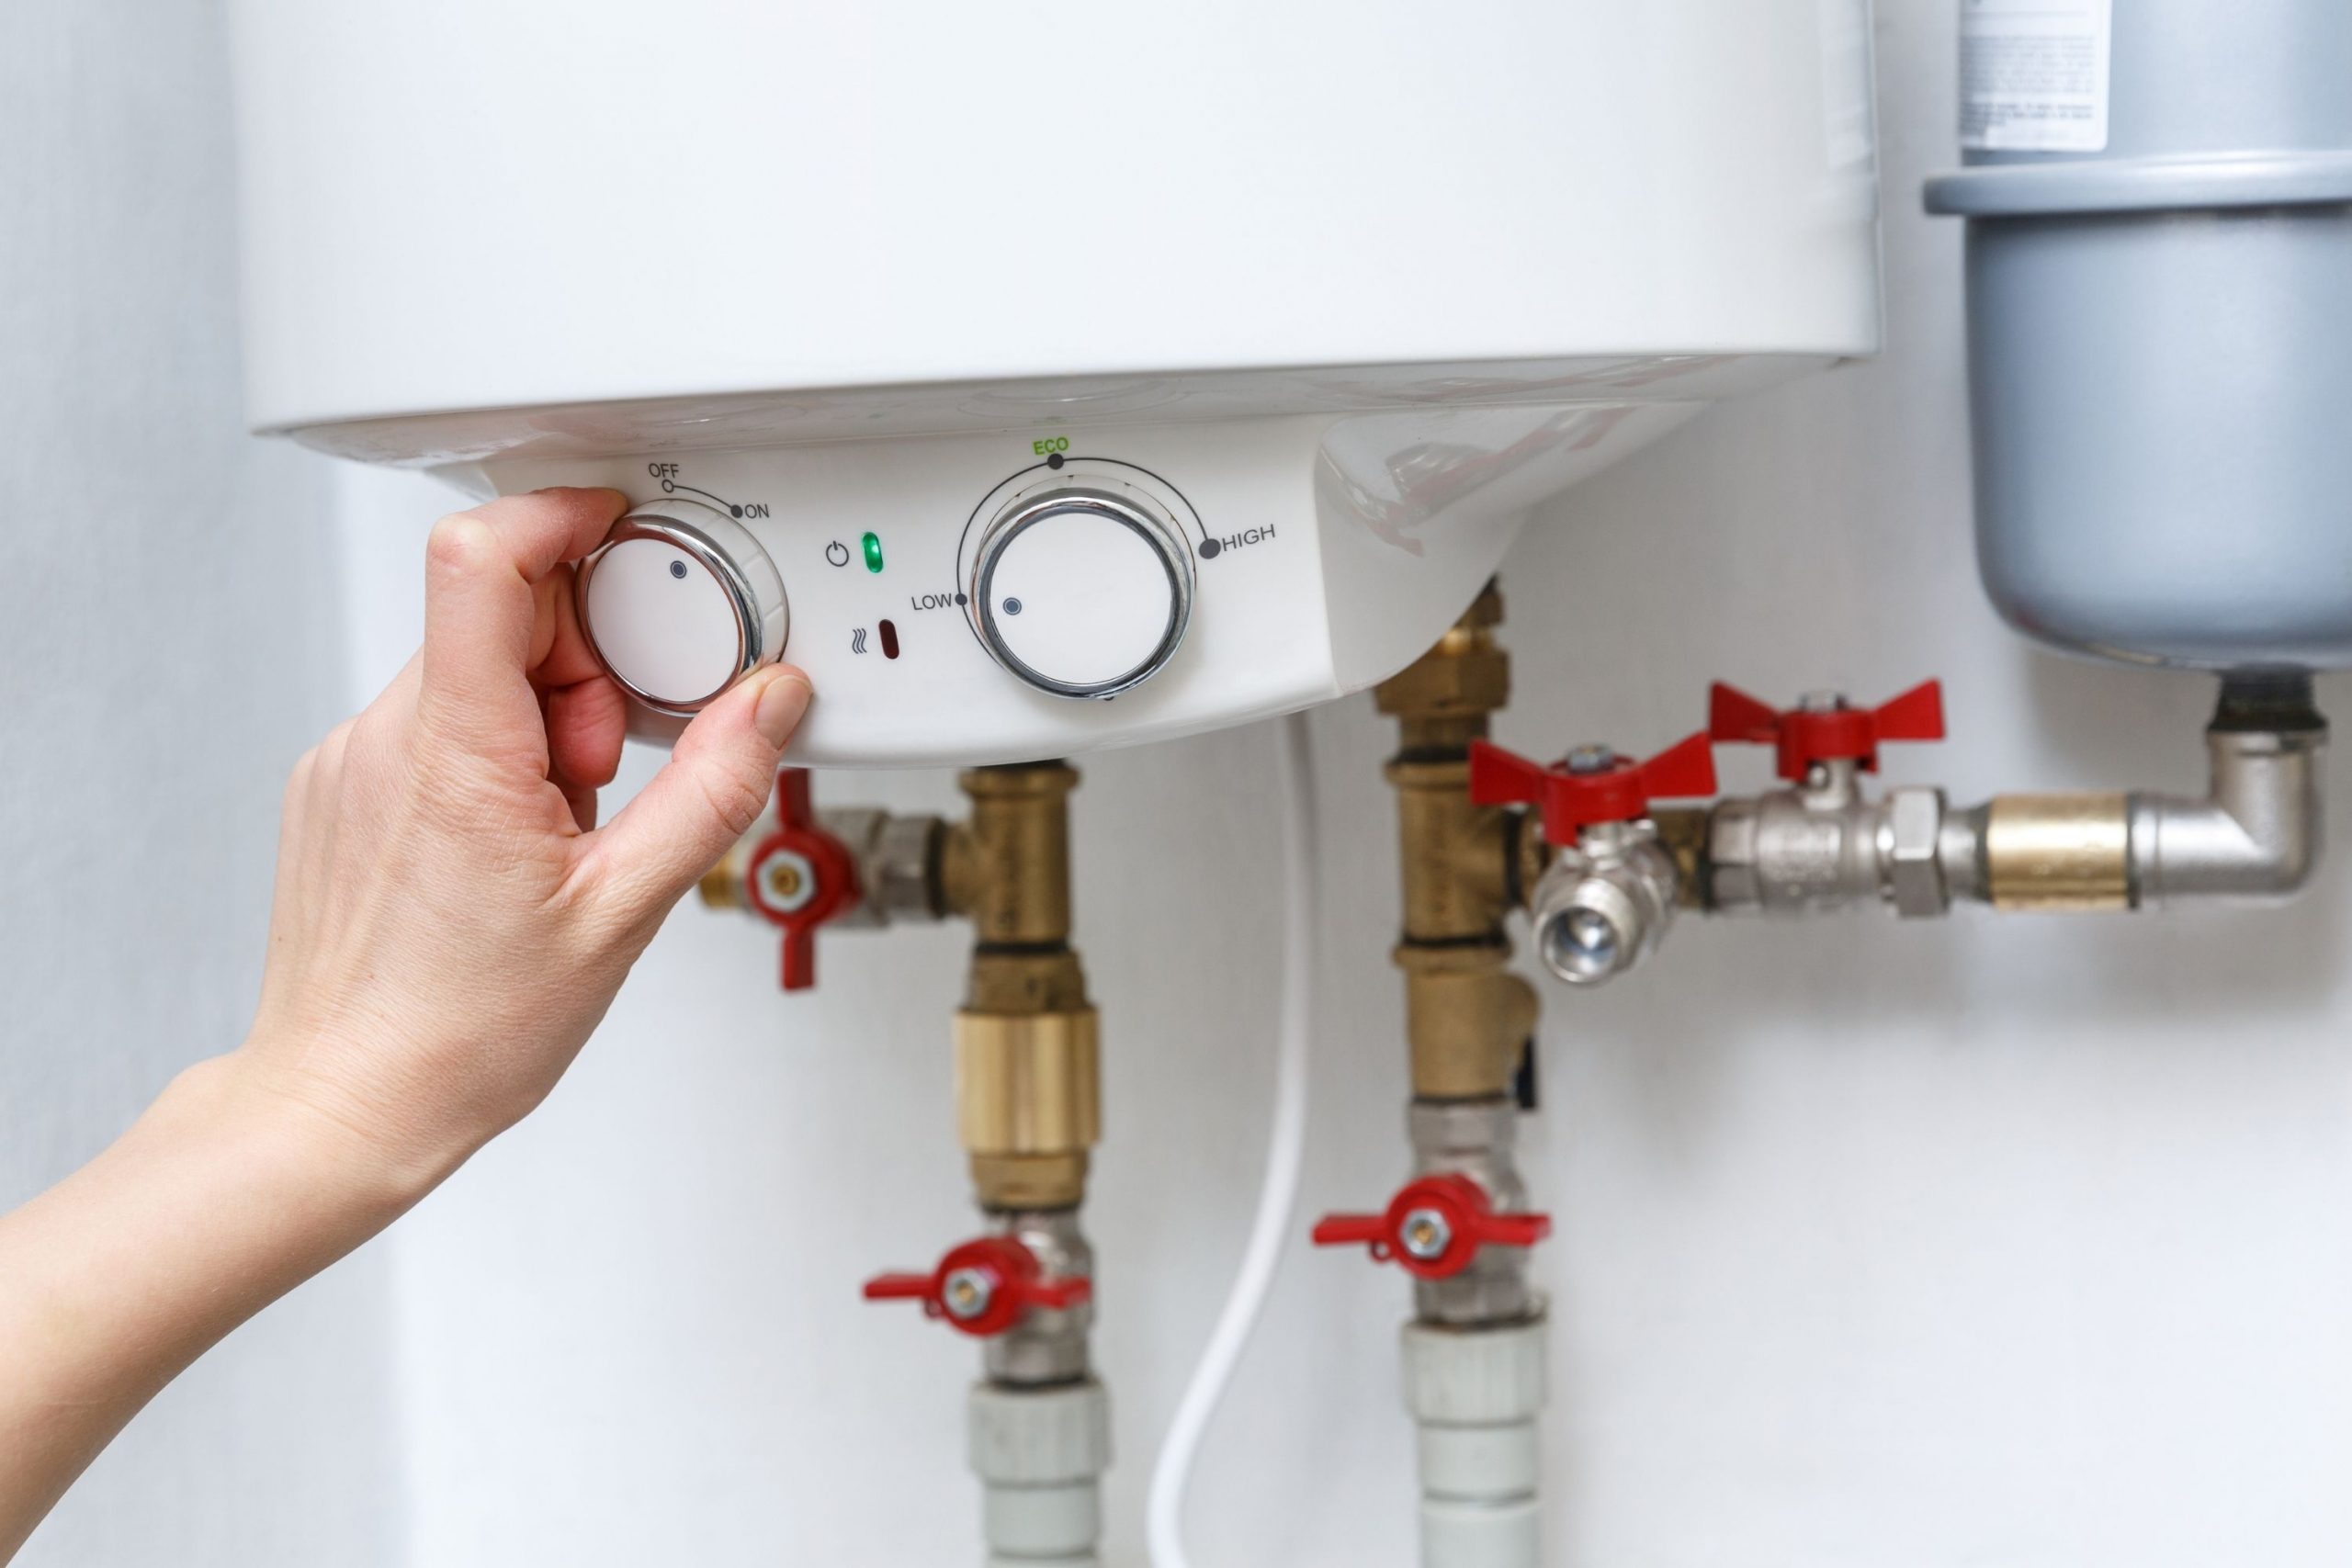 How to Turn Off a Pilot Light On Water Heater